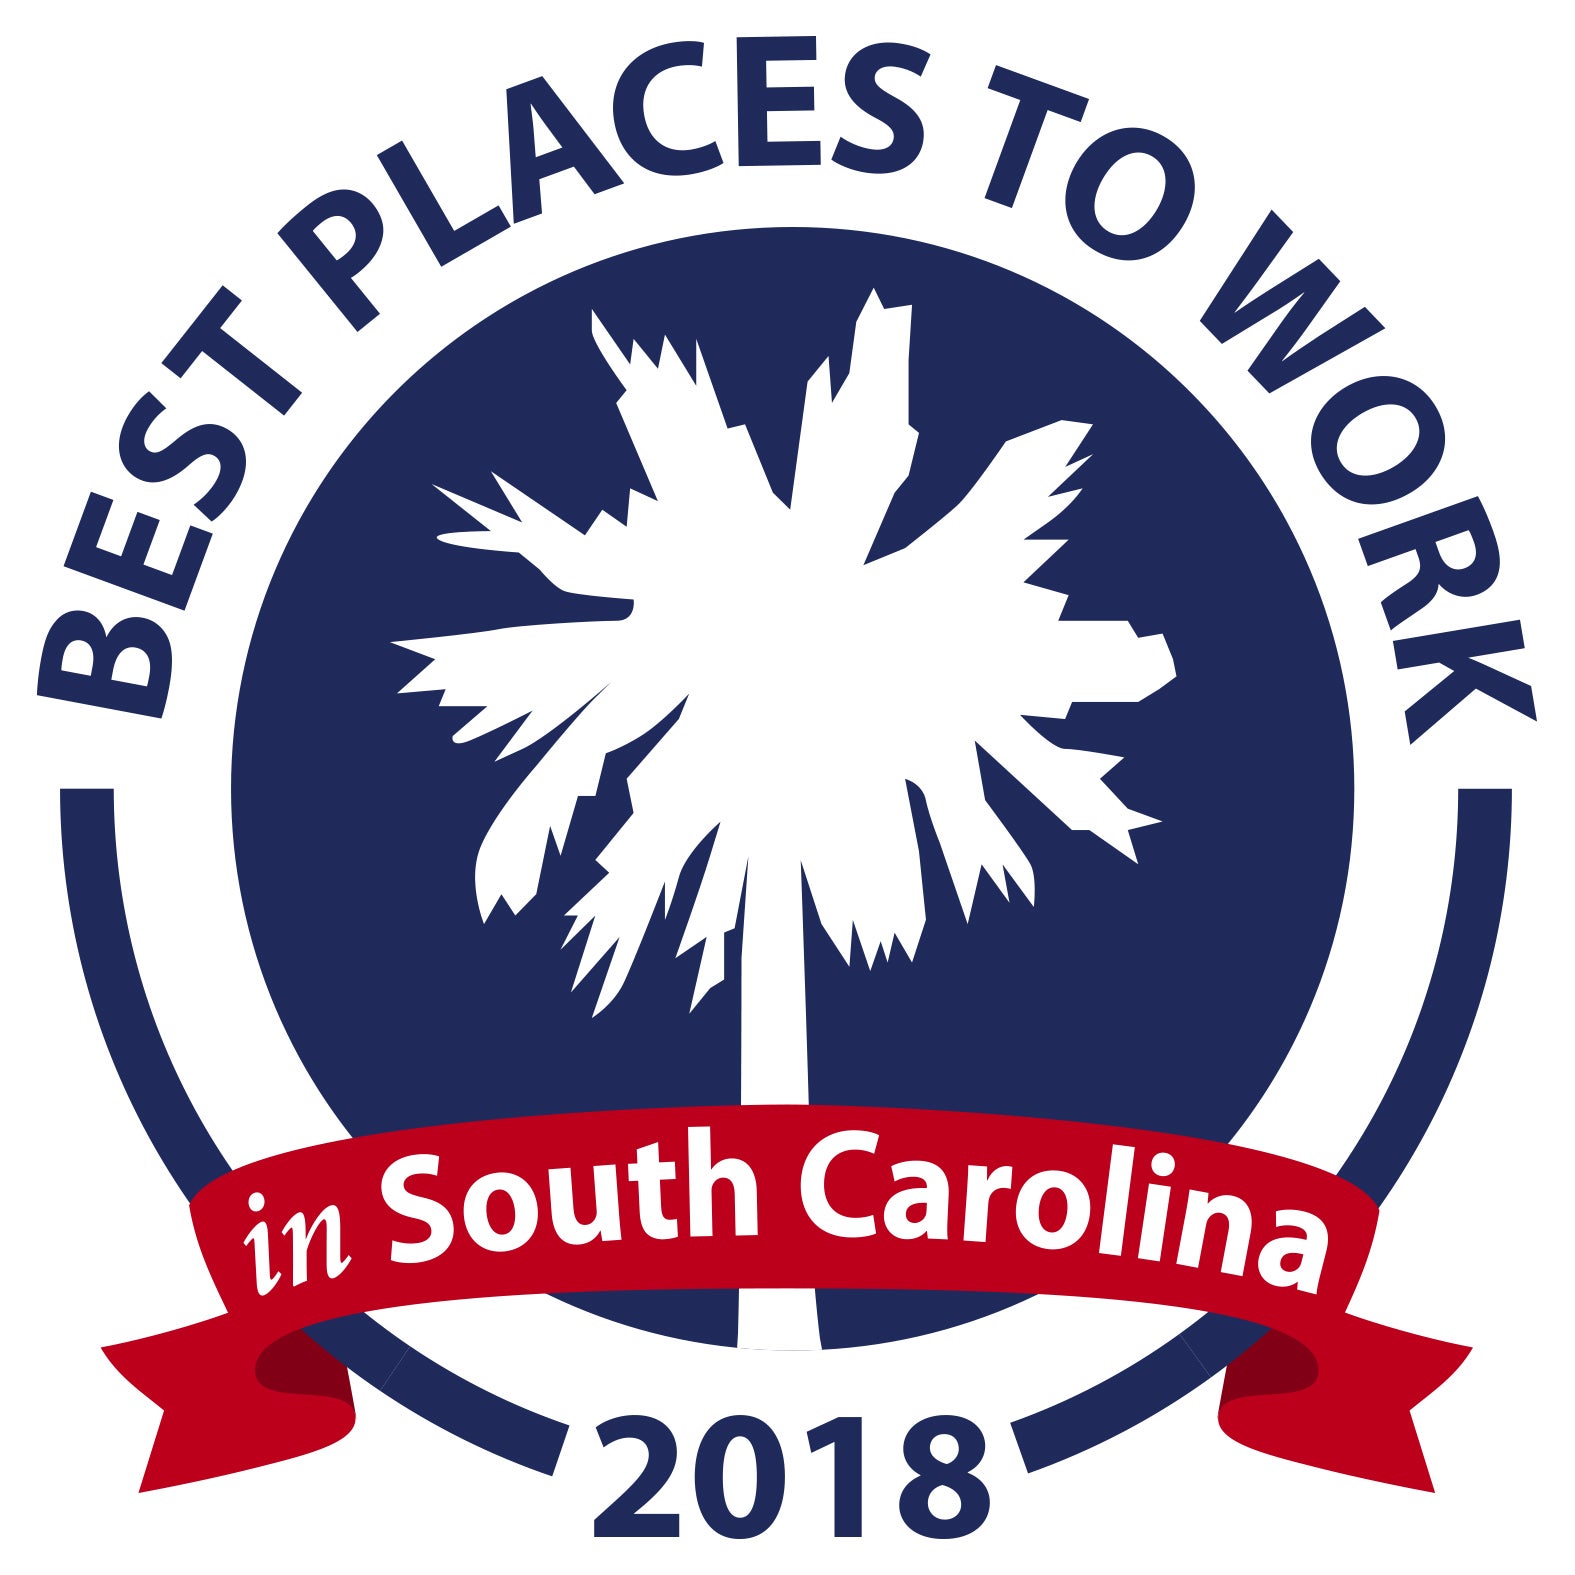 Best-Places-to-Work-2018.jpg